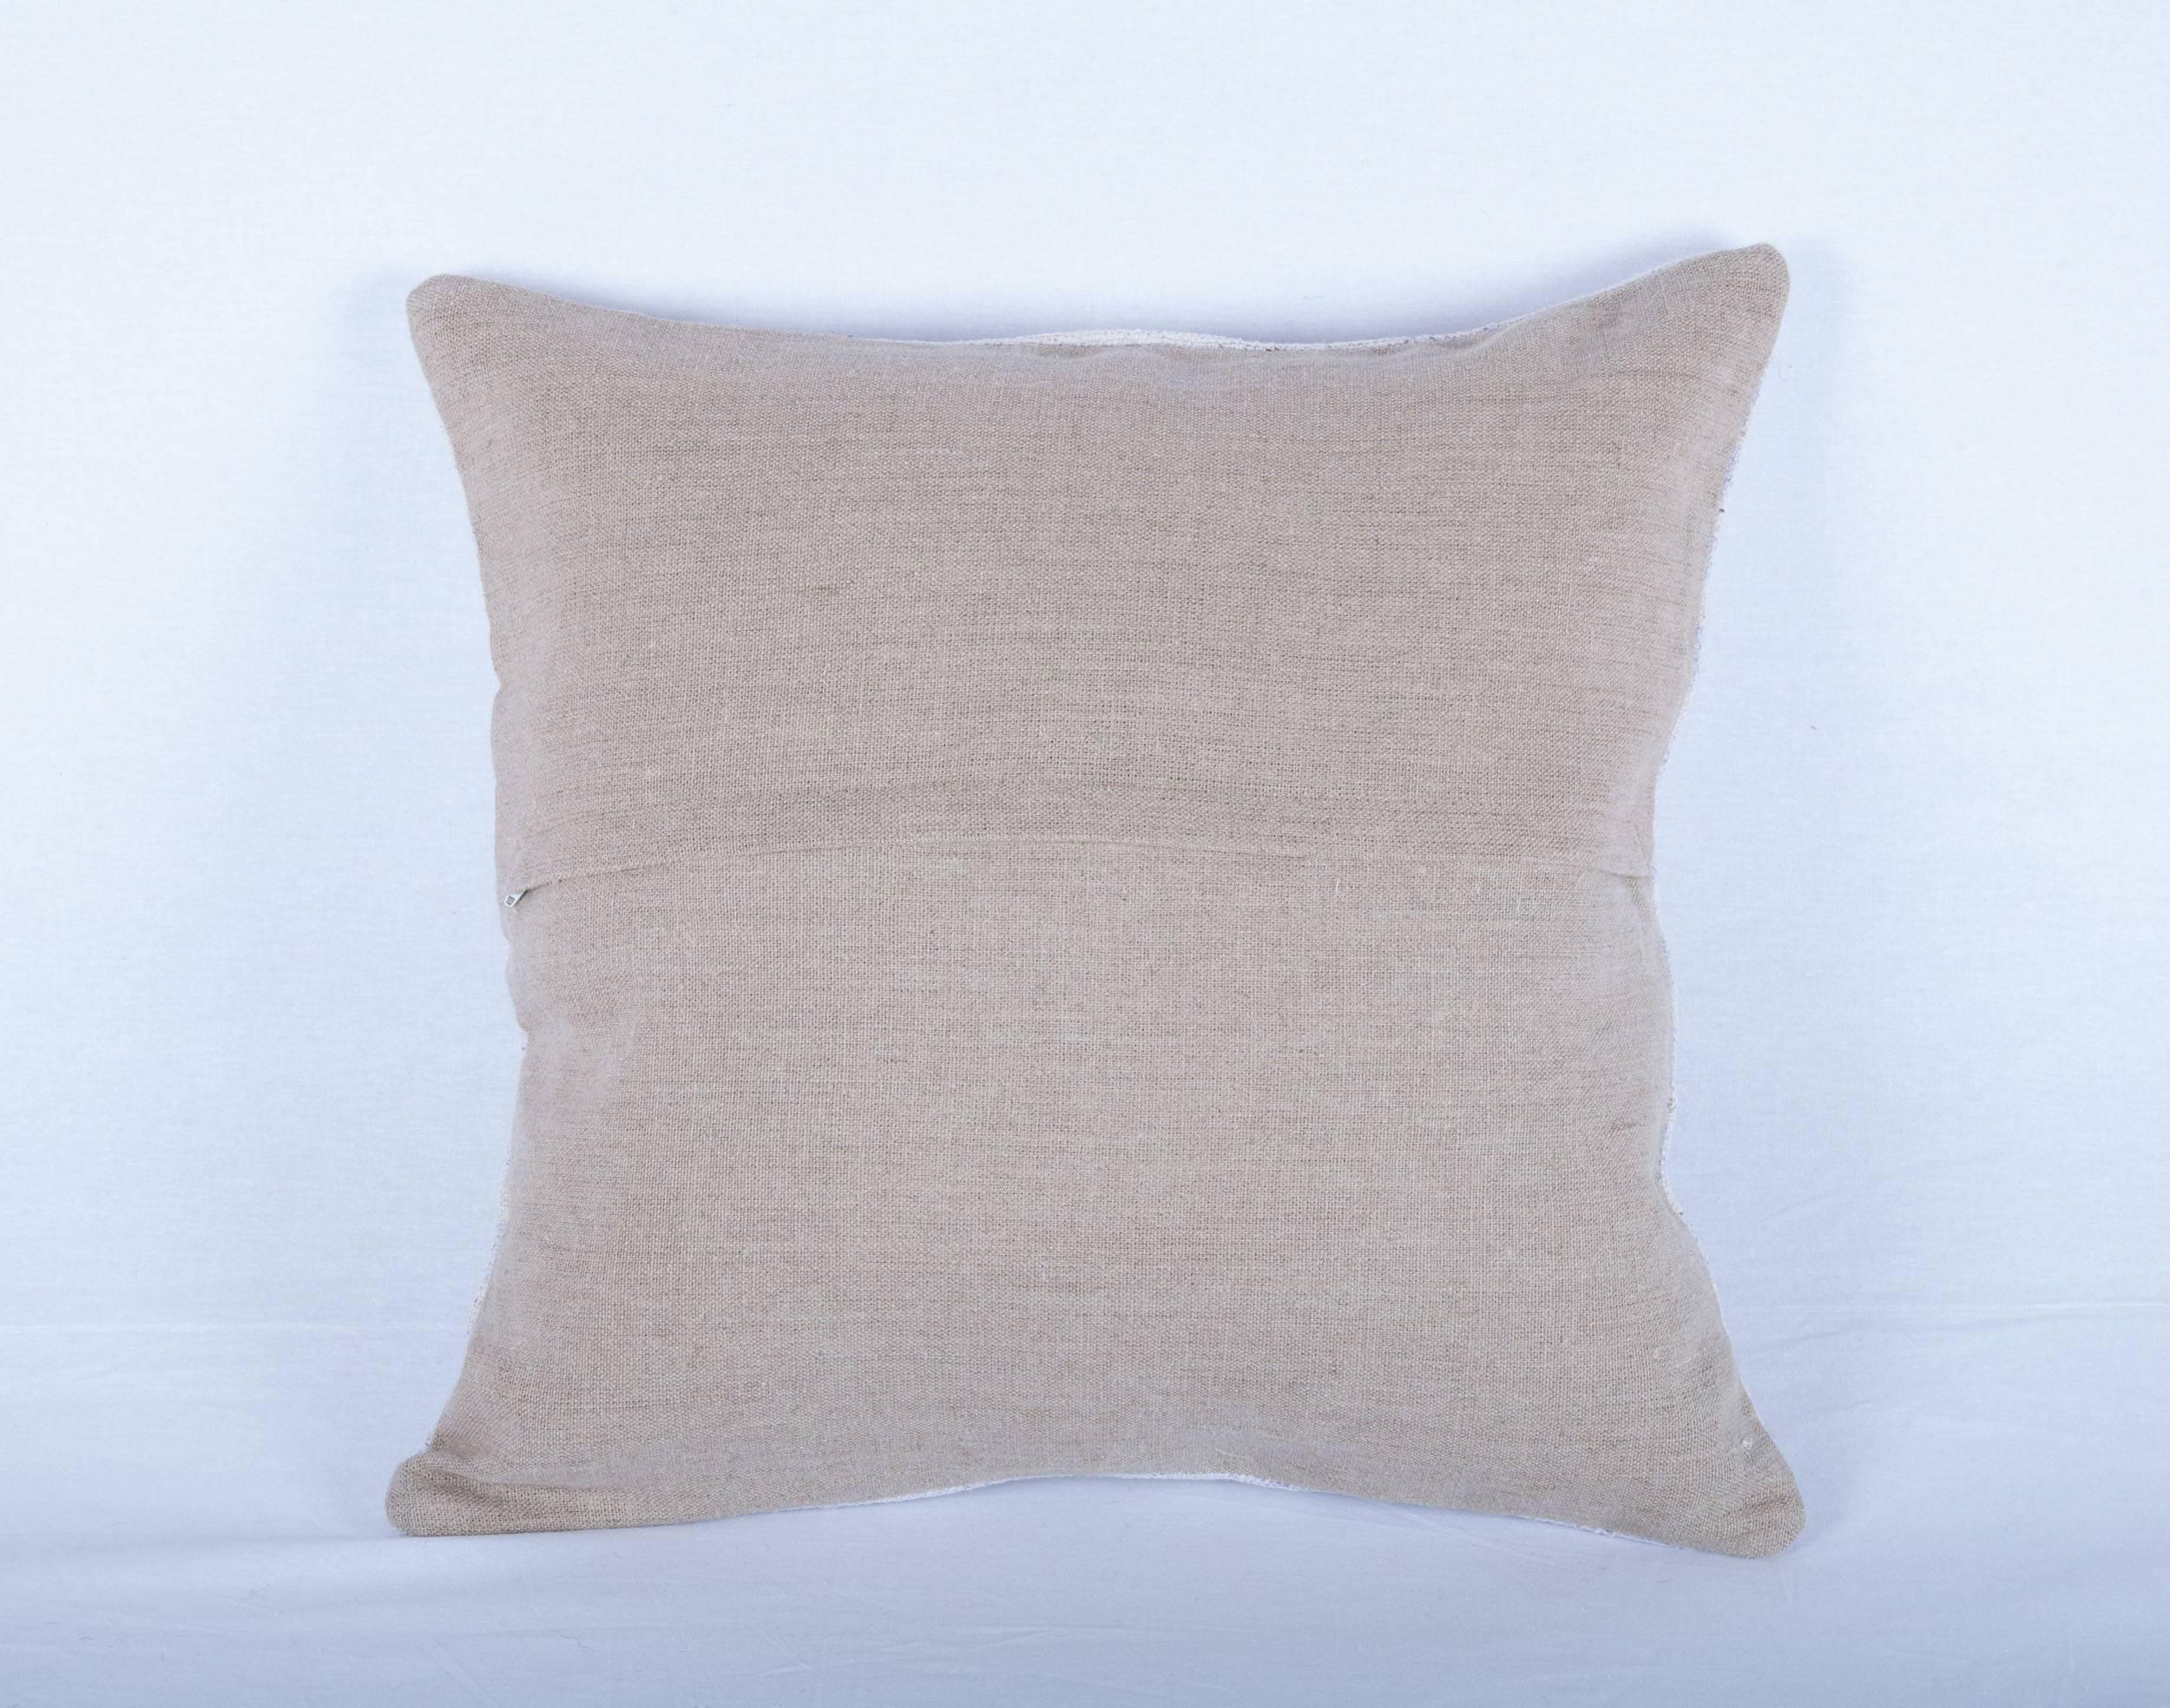 Contemporary Pillow with a New Design on a Vintage Anatolian Nomadic  Kilim, by Seref Ozen